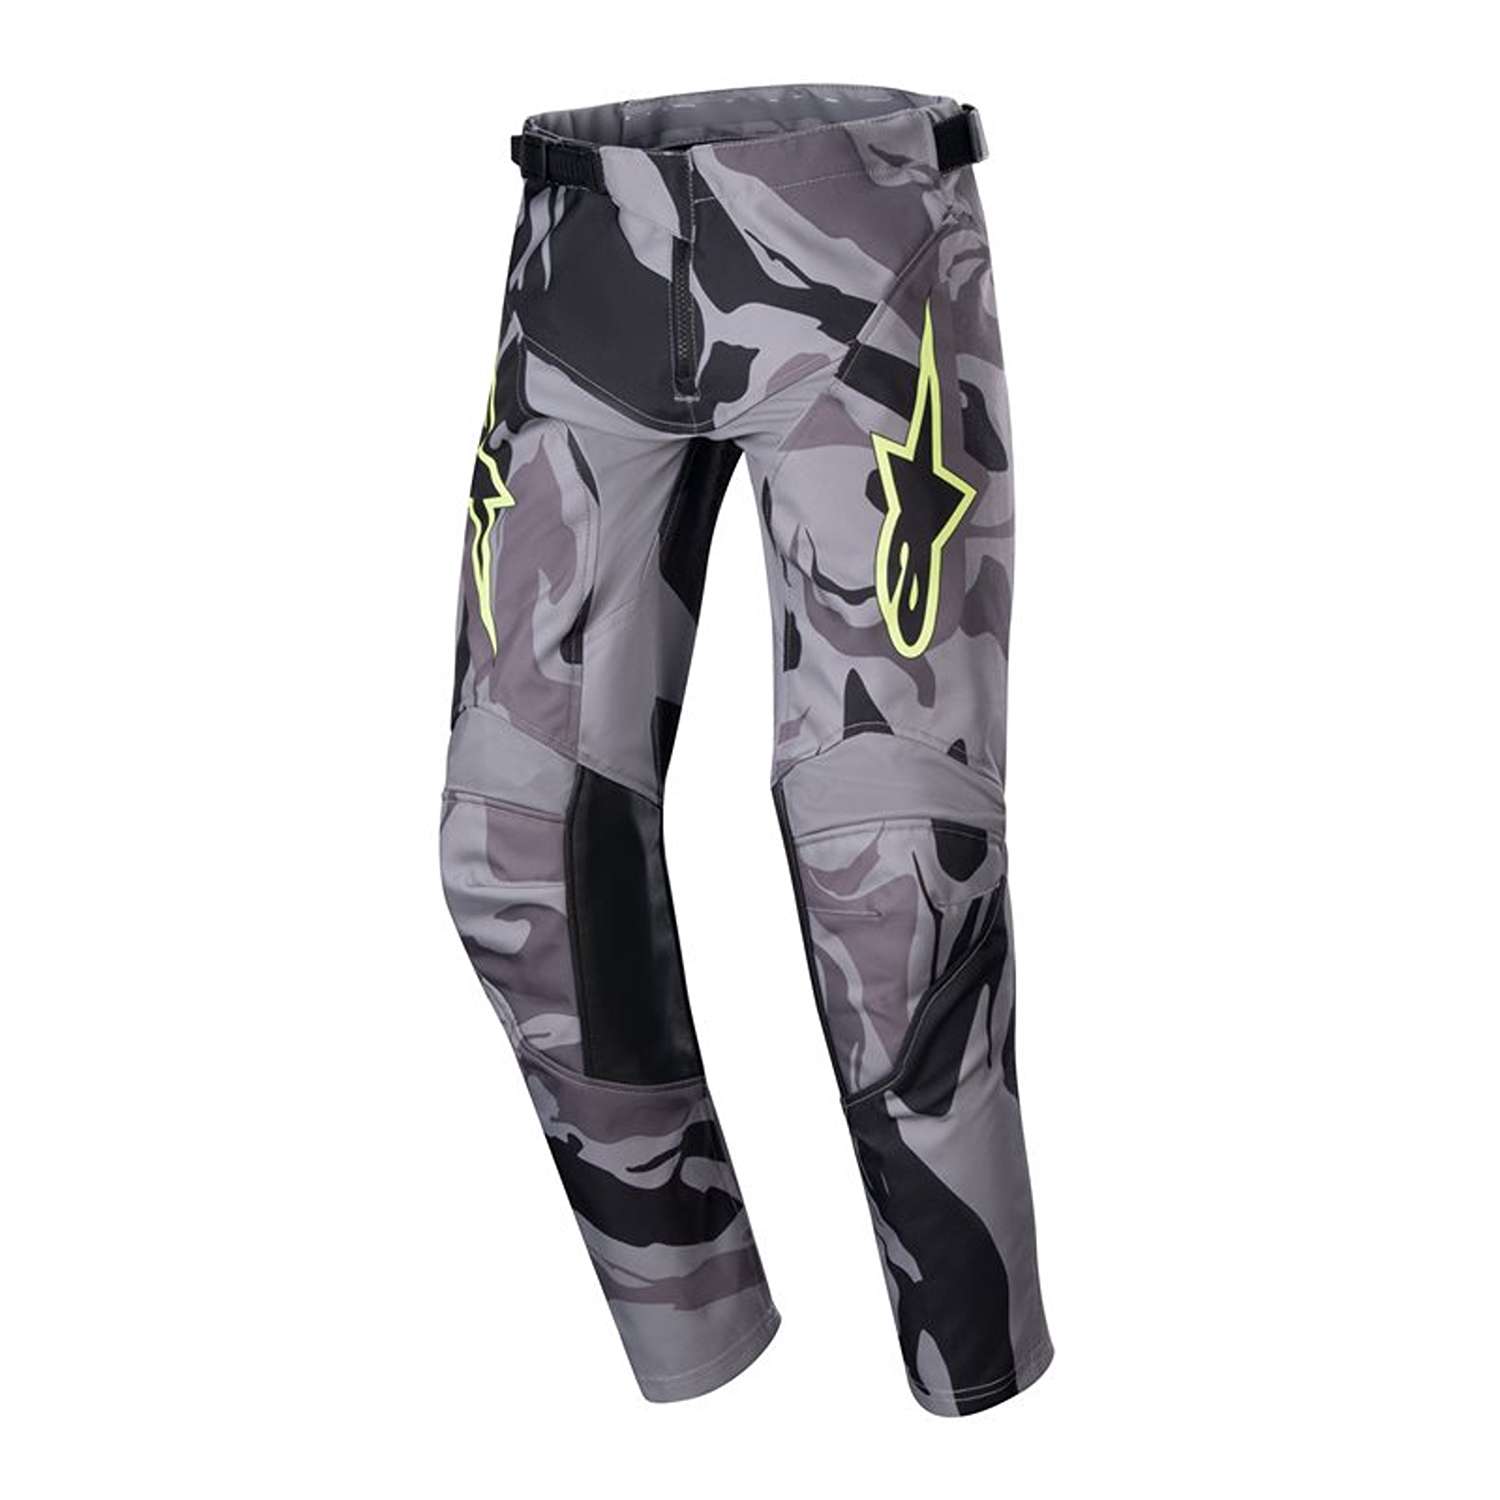 Image of EU Alpinestars Youth Racer Tactical Pants Cast Gray Camo Magnet Taille 22